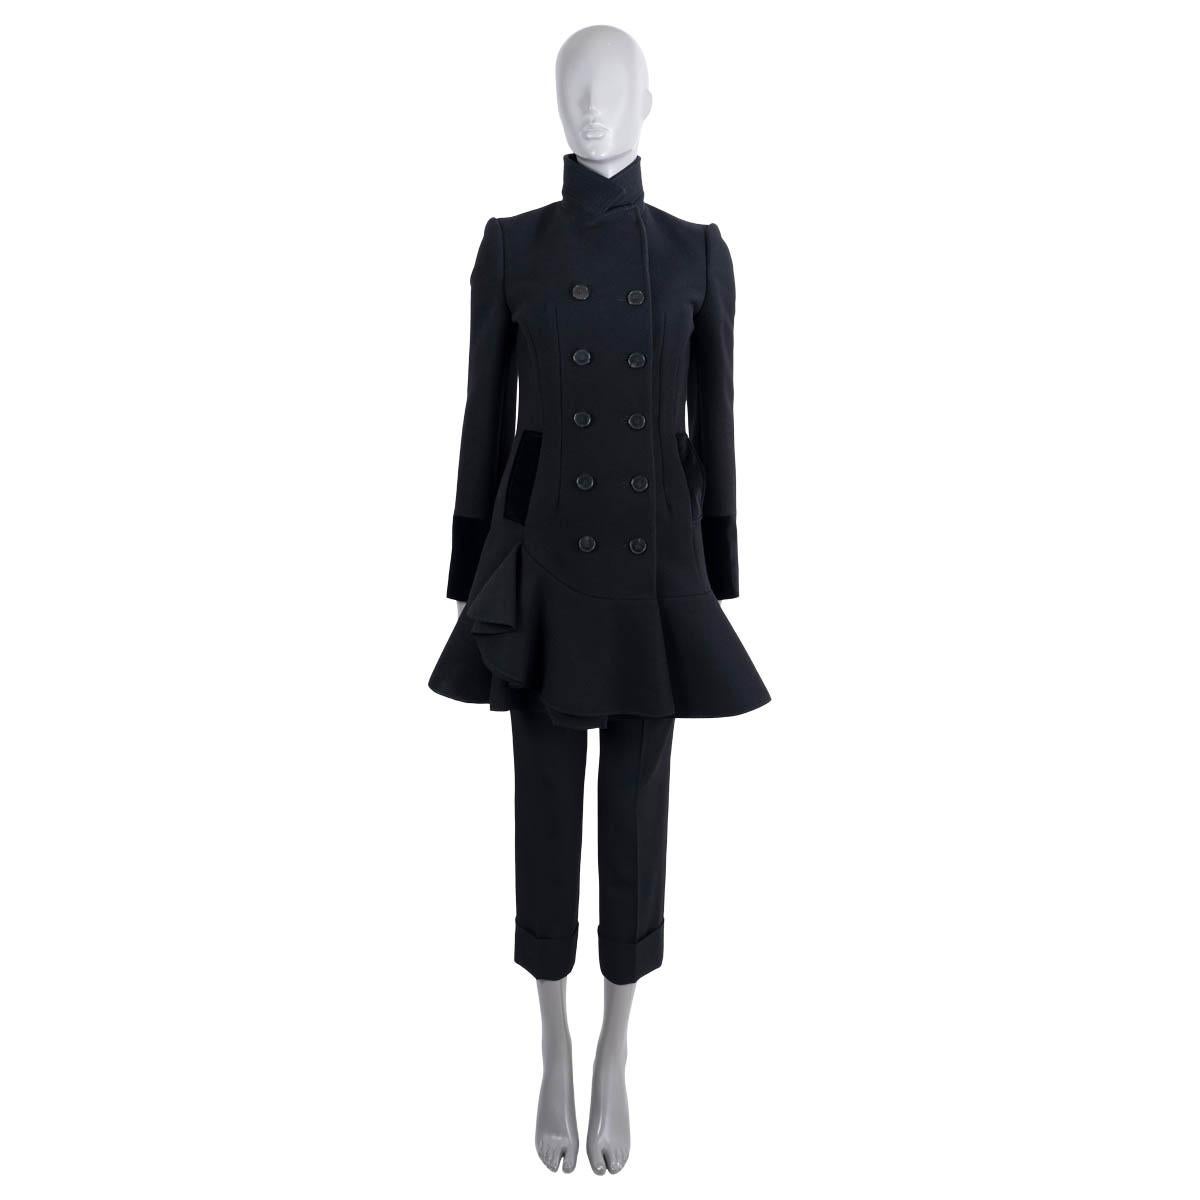 100% authentic Alexander McQueen double-breasted coat in black wool (100%). Features a tailored silhouette, high-neck, ruffled hem and two flap pockets at the waist. Pocket flaps and cuffs are in black velvet cotton (with 2% elastane). Opens with